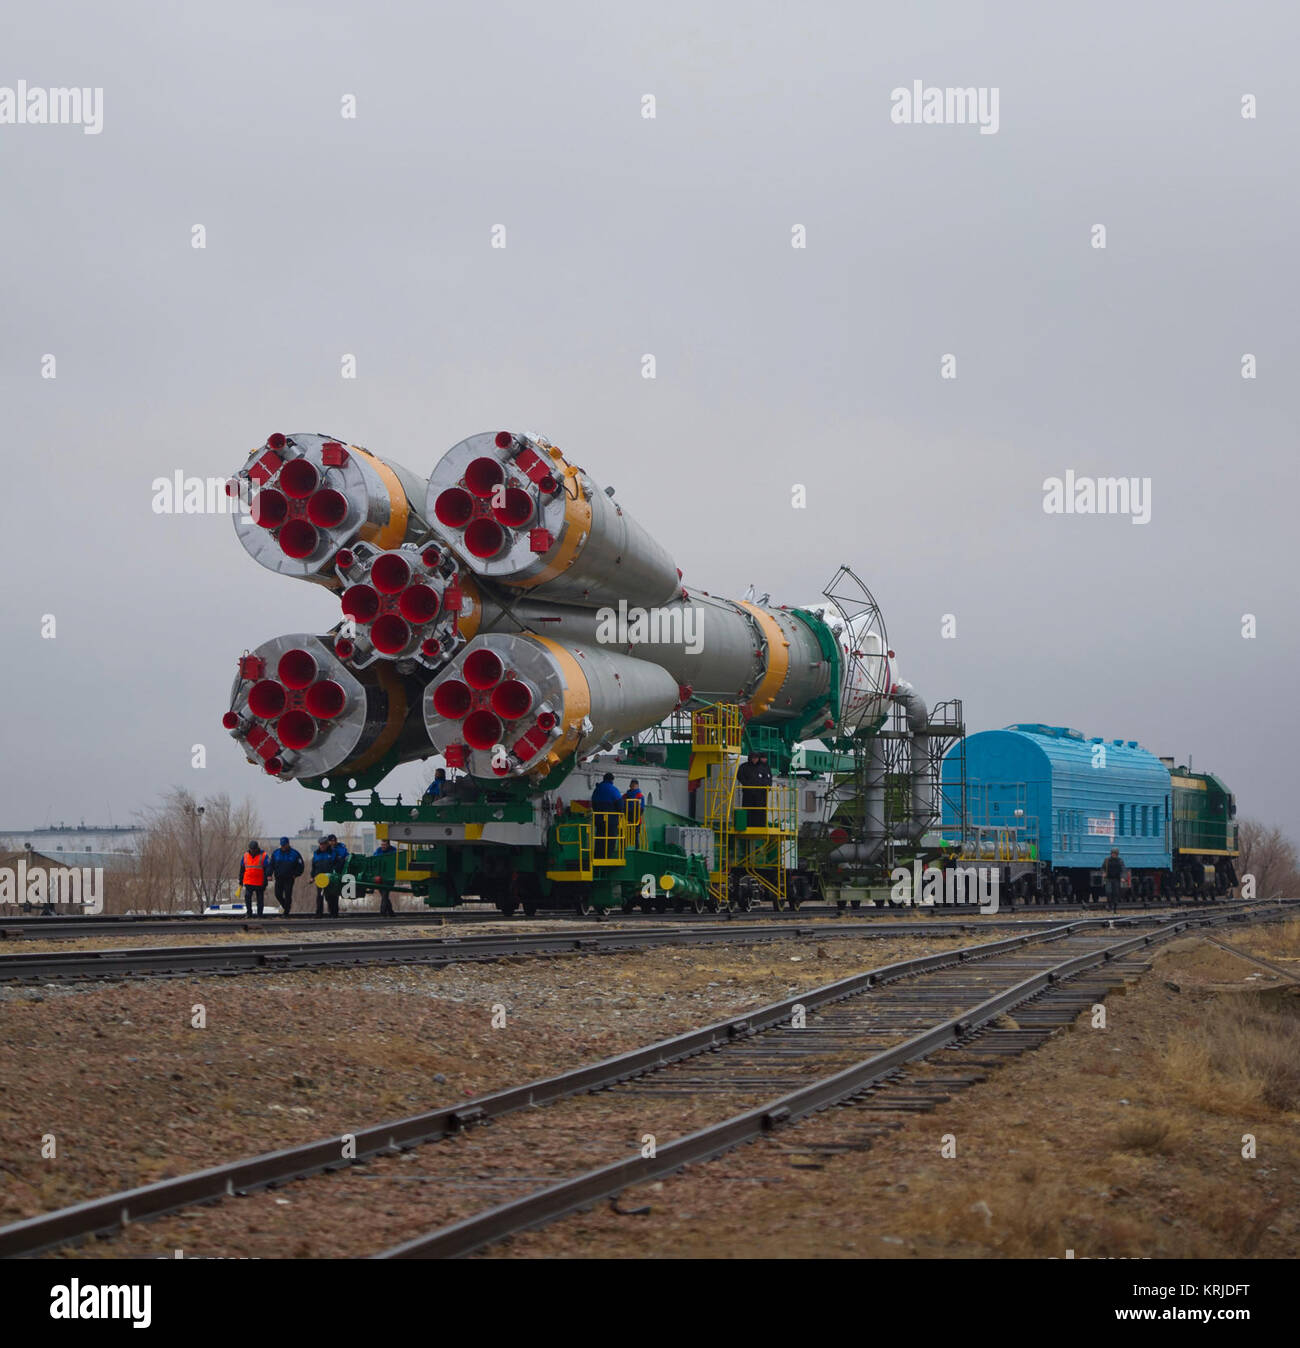 The Soyuz TMA-21 spacecraft is rolled out by train on its way to the launch pad at the Baikonur Cosmodrome in Kazakhstan, Saturday, April 2, 2011.  The launch of the Soyuz spacecraft with Expedition 27 Soyuz Commander Alexander Samokutyaev, NASA Flight Engineer Ron Garan and Russian Flight Engineer Andrey Borisenko is scheduled for Tuesday, April 5, 2011.  Photo Credit (NASA/Carla Cioffi) Soyuz TMA-21 spacecraft is rolled out by train Stock Photo